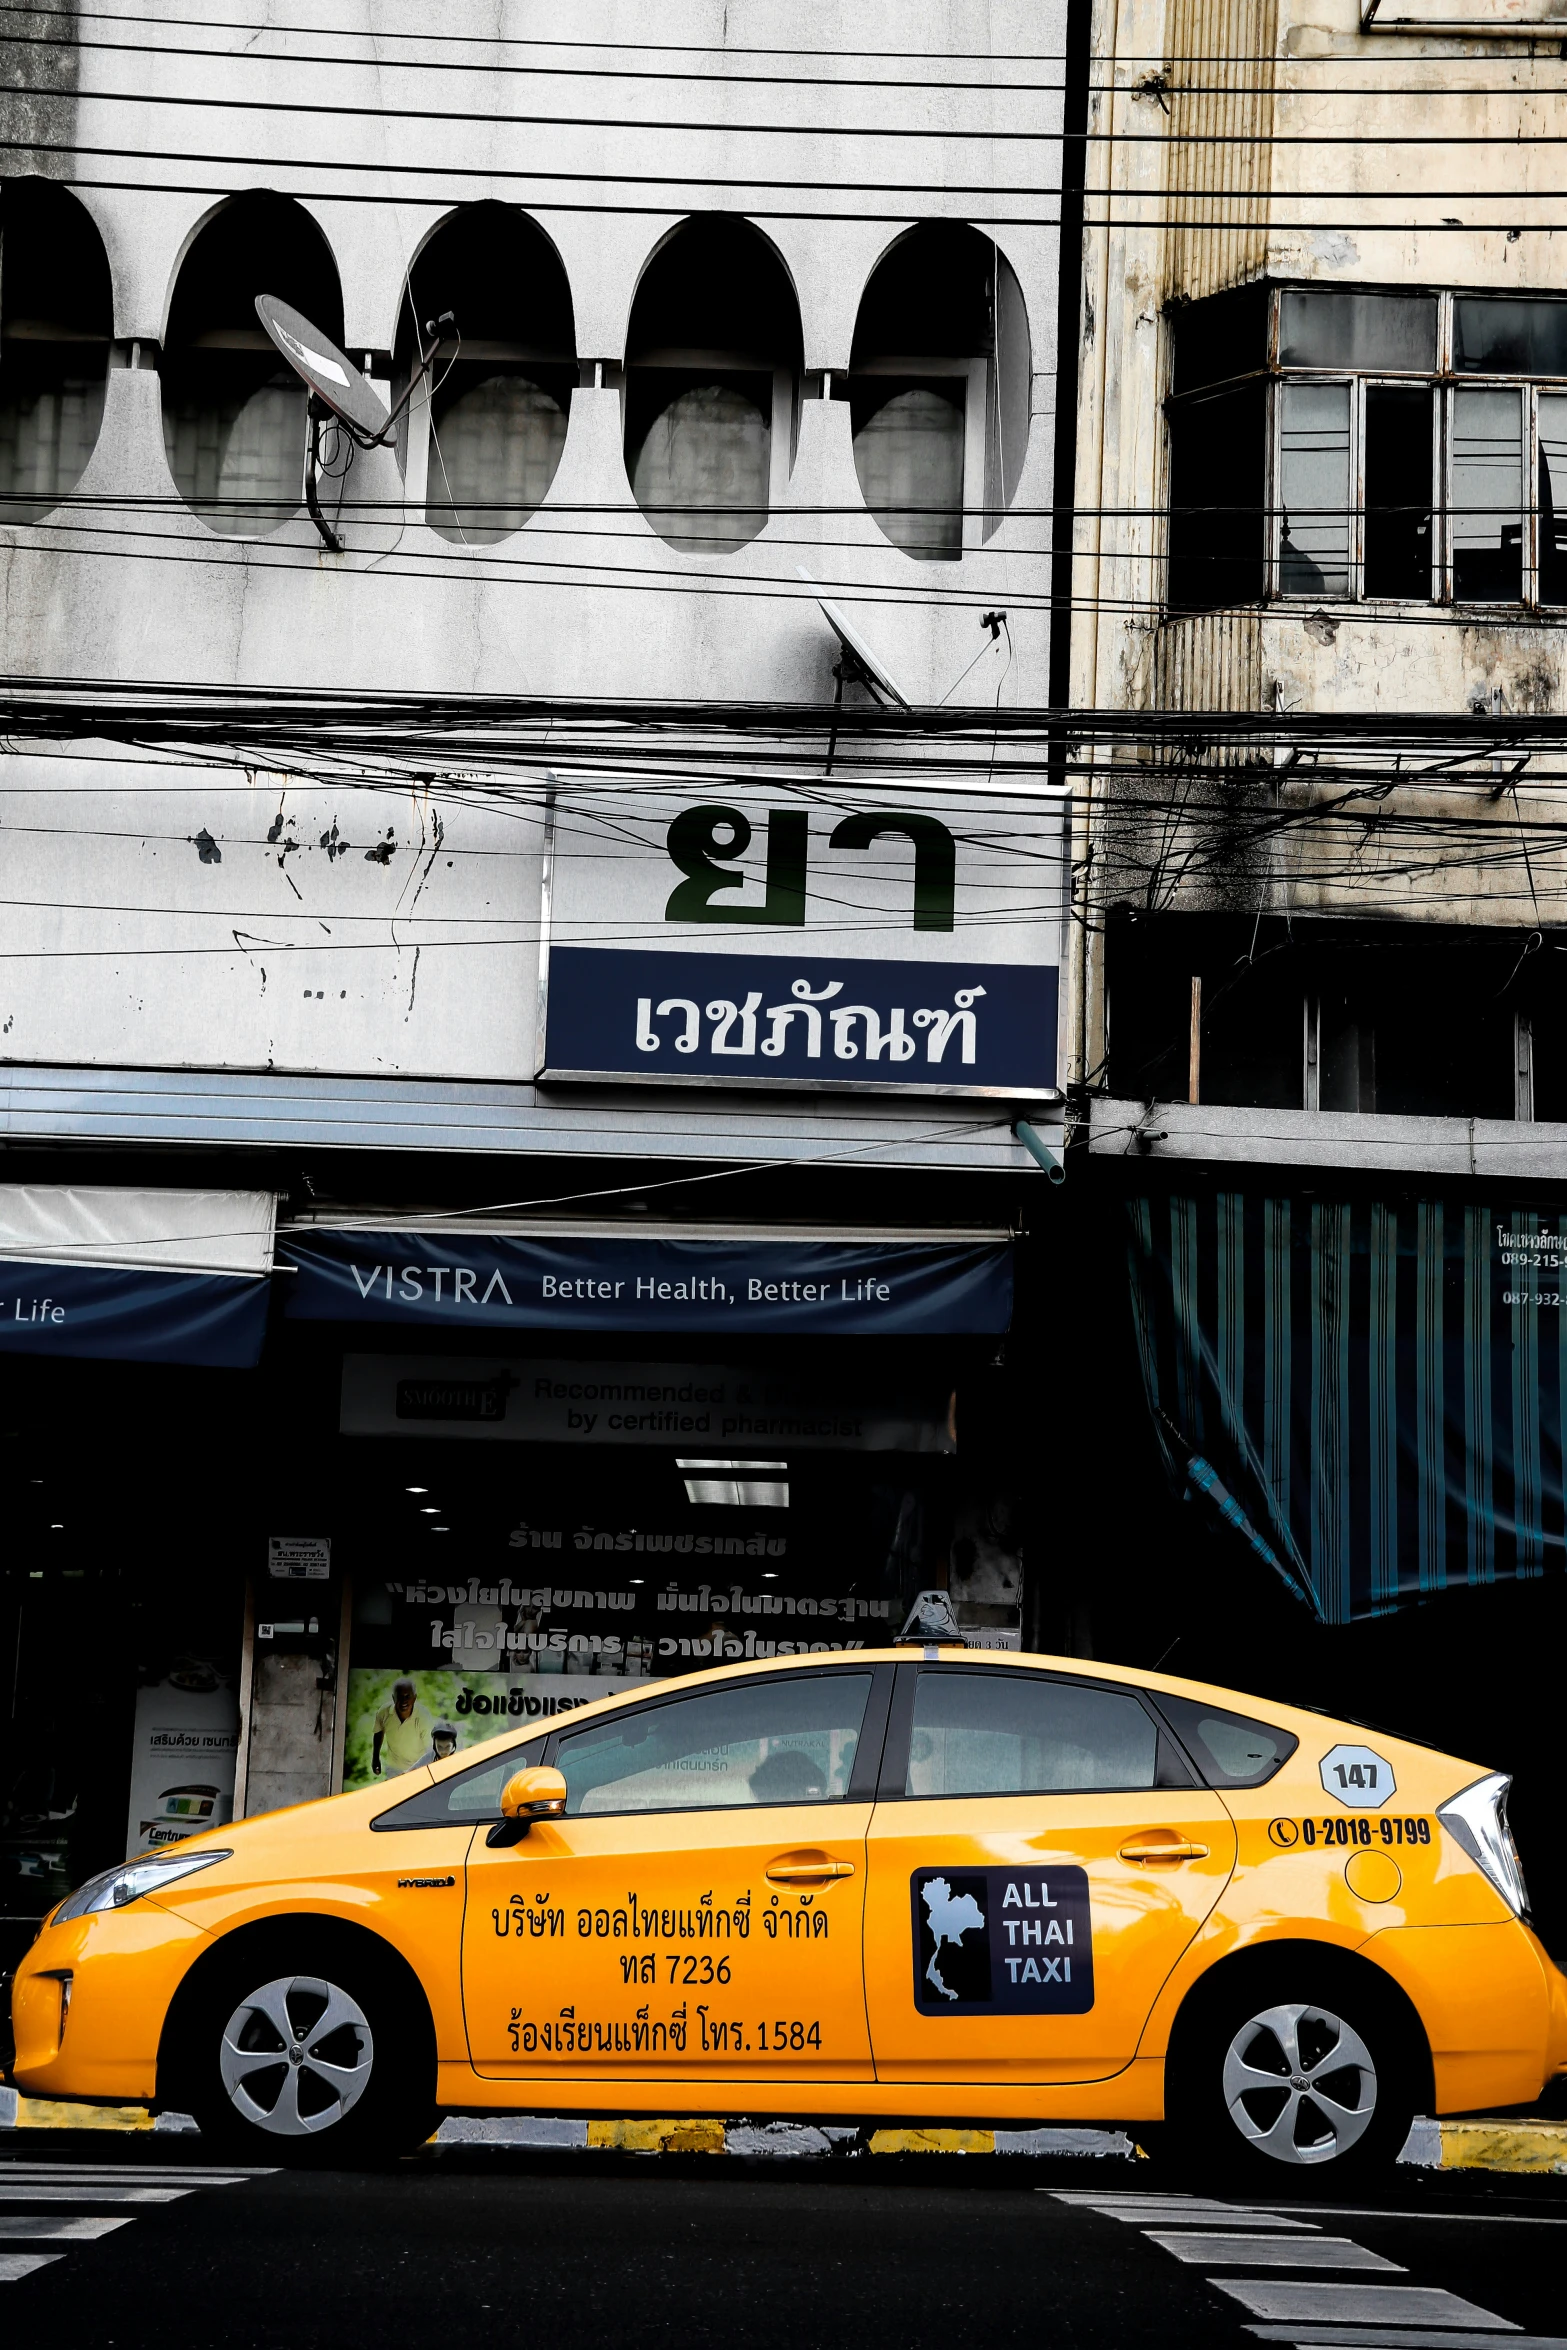 a yellow taxi cab in front of a city building